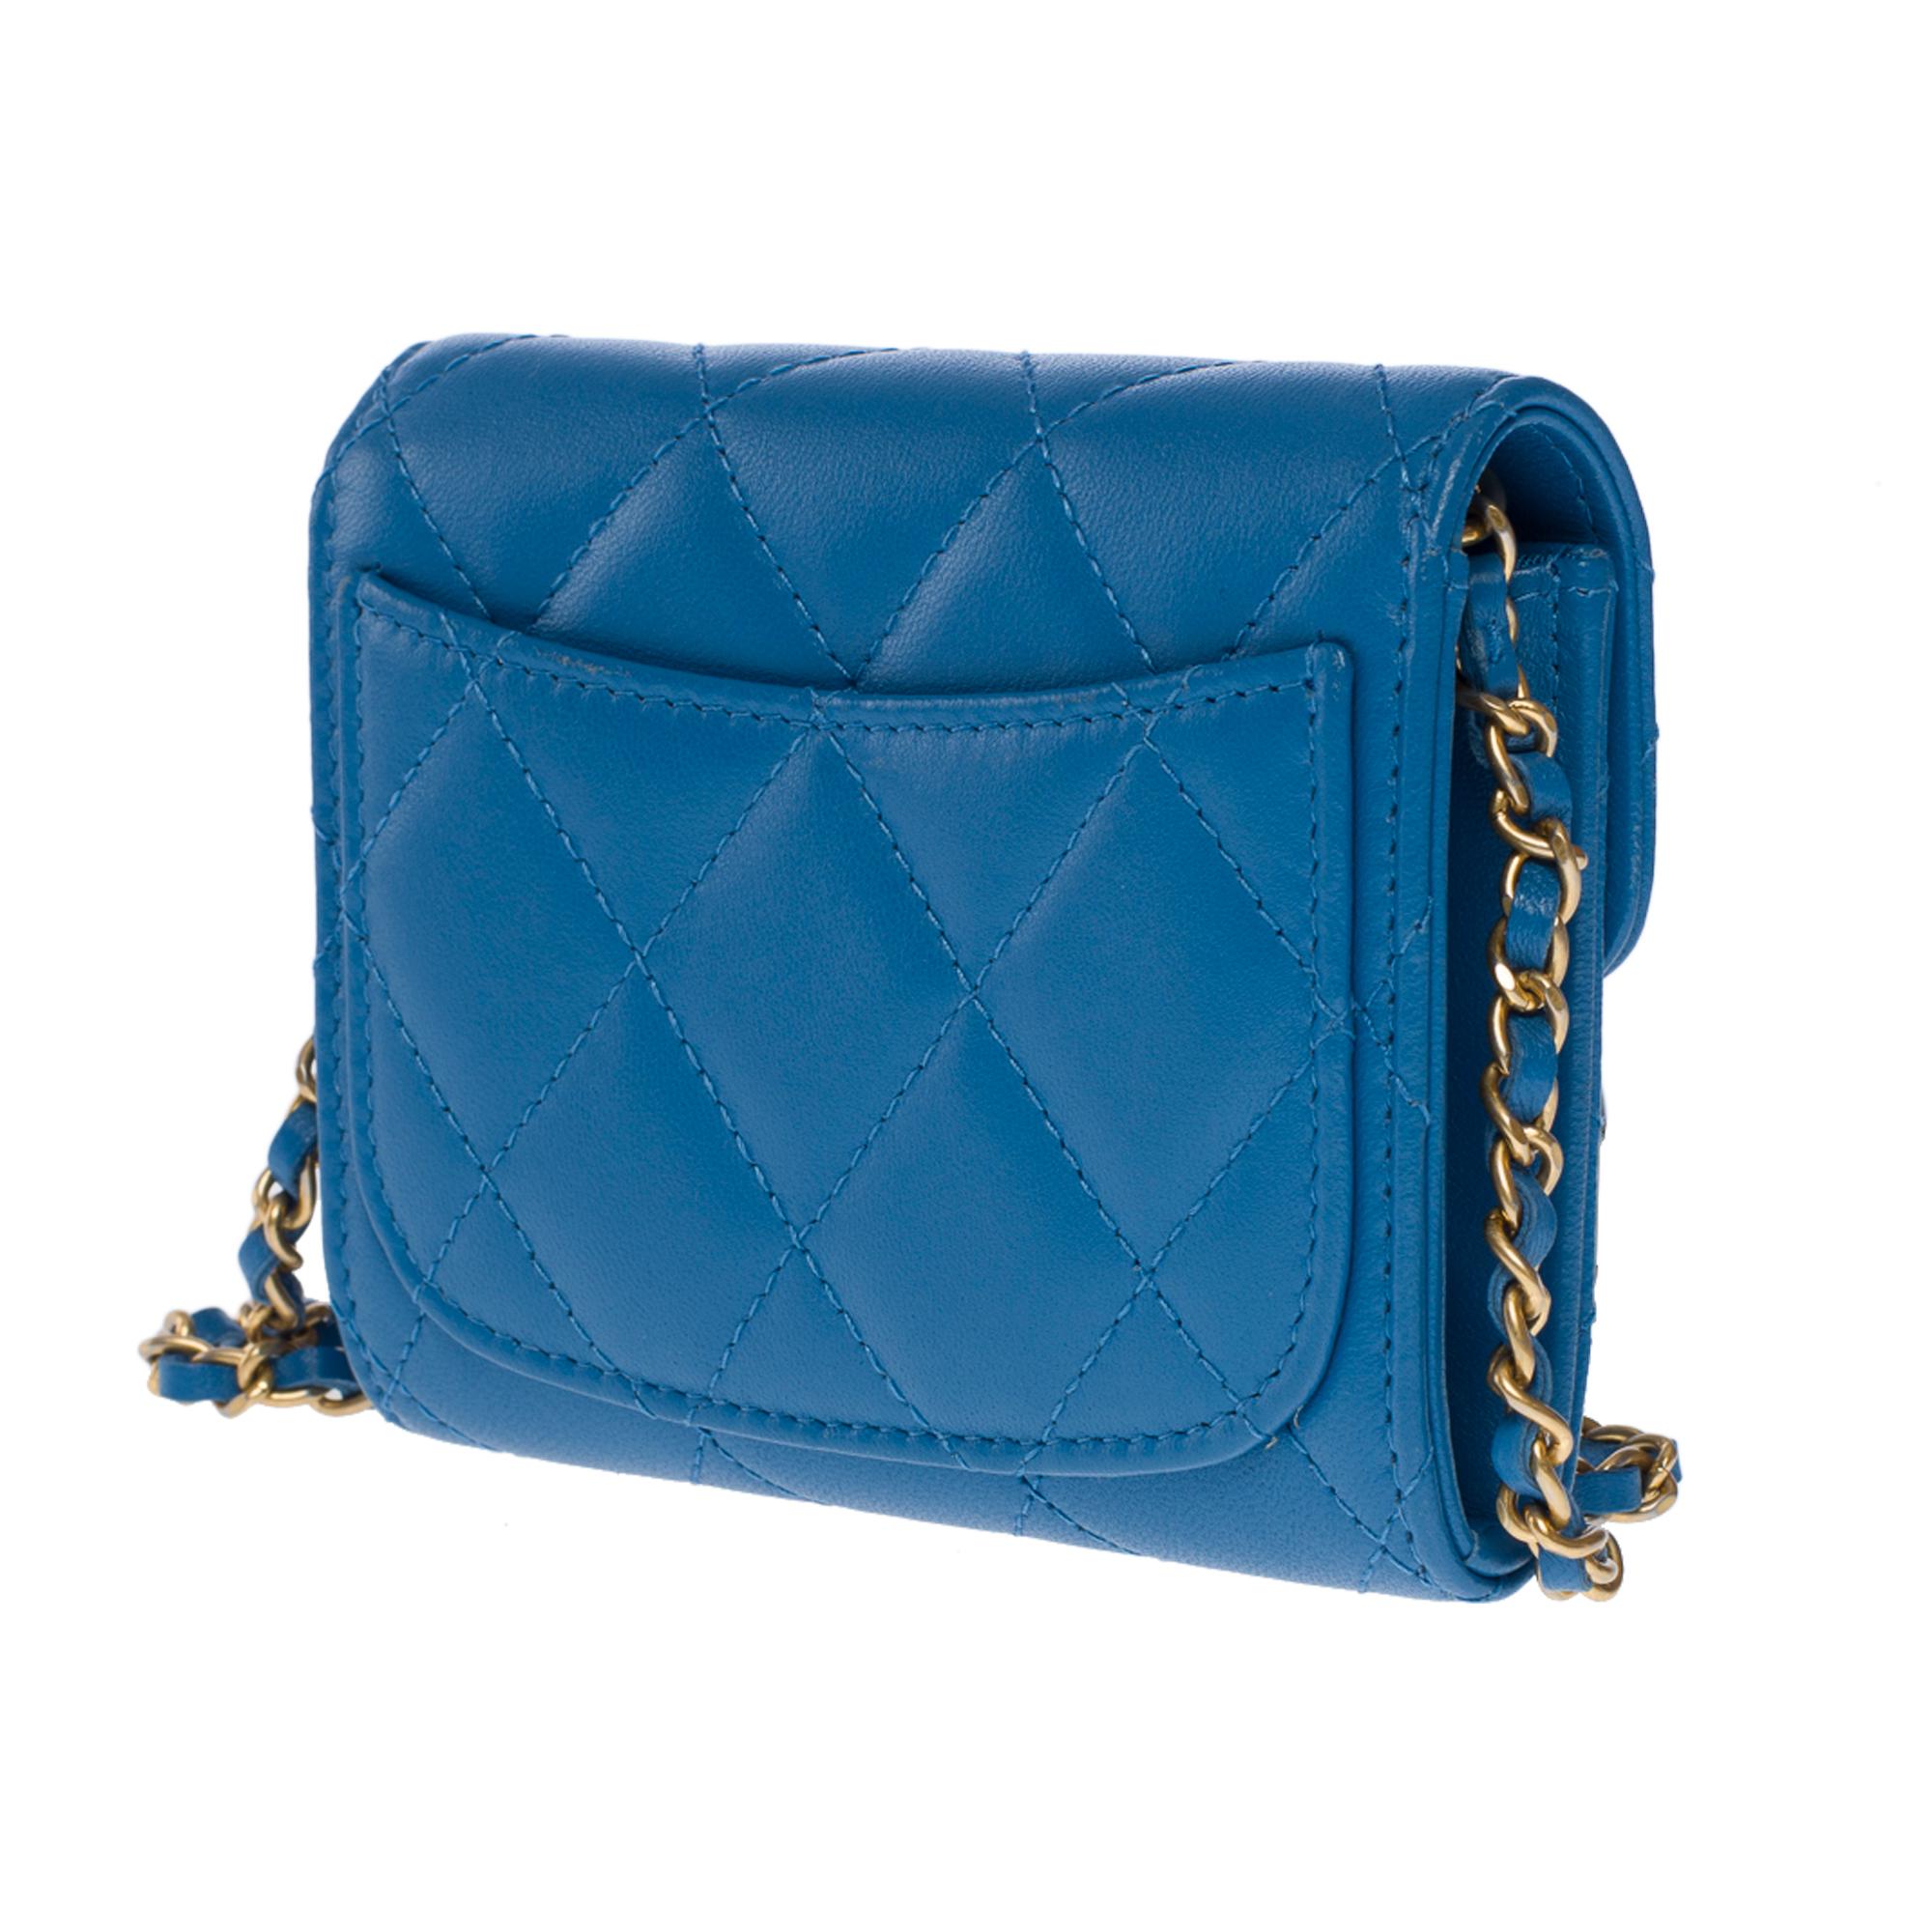 New Chanel Mini Wallet on Chain (WOC)  shoulder bag in blue quilted leather, GHW 1